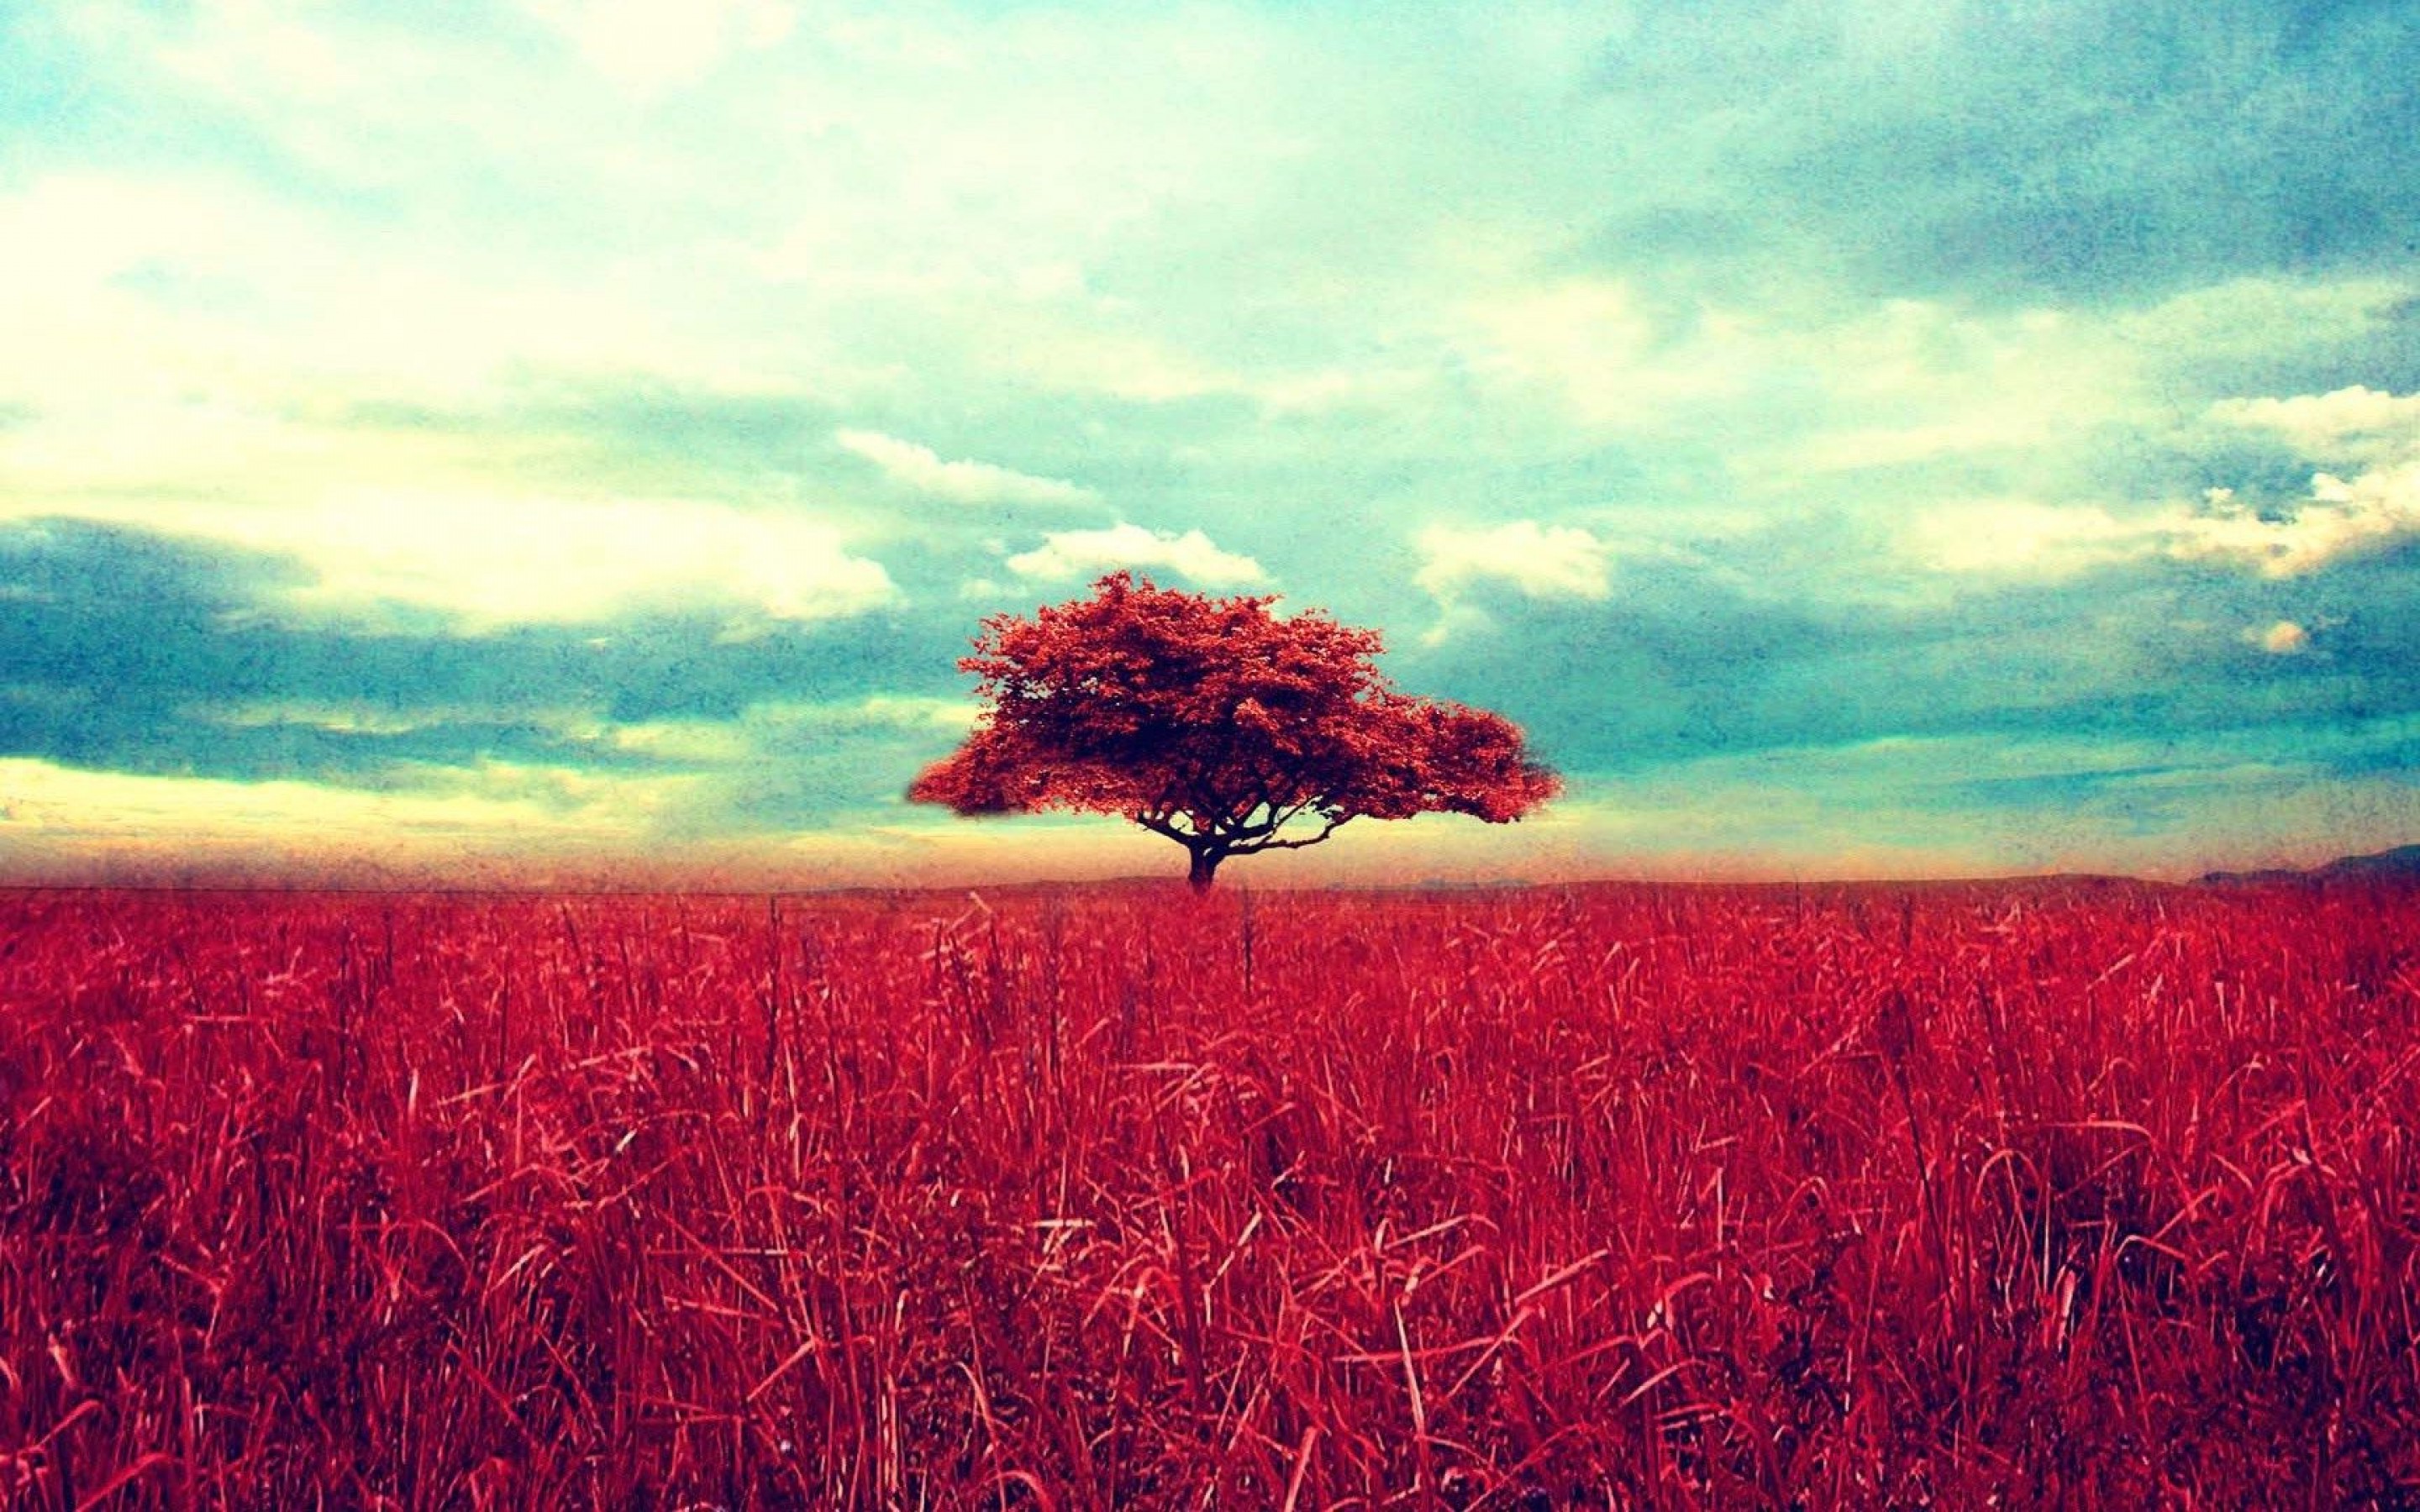 nature wallpaper tumblr,sky,natural landscape,people in nature,nature,red